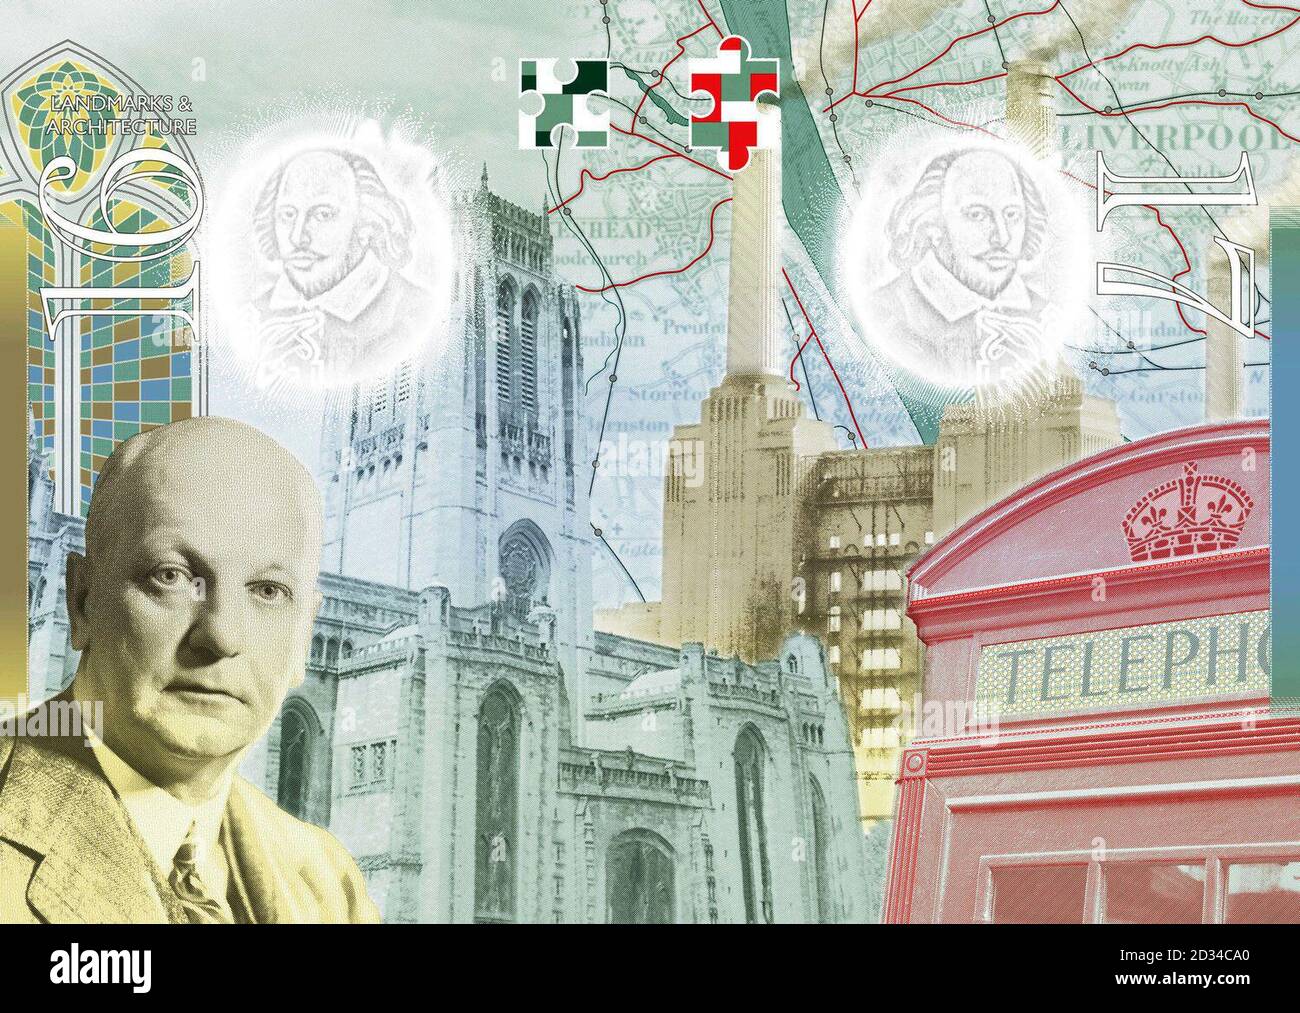 Two pages (featuring Sir Giles Gilbert Scott - Landmarks and Architecture) from the new British passport design that have been unveiled at Shakespeare's Globe Theatre in London. Stock Photo